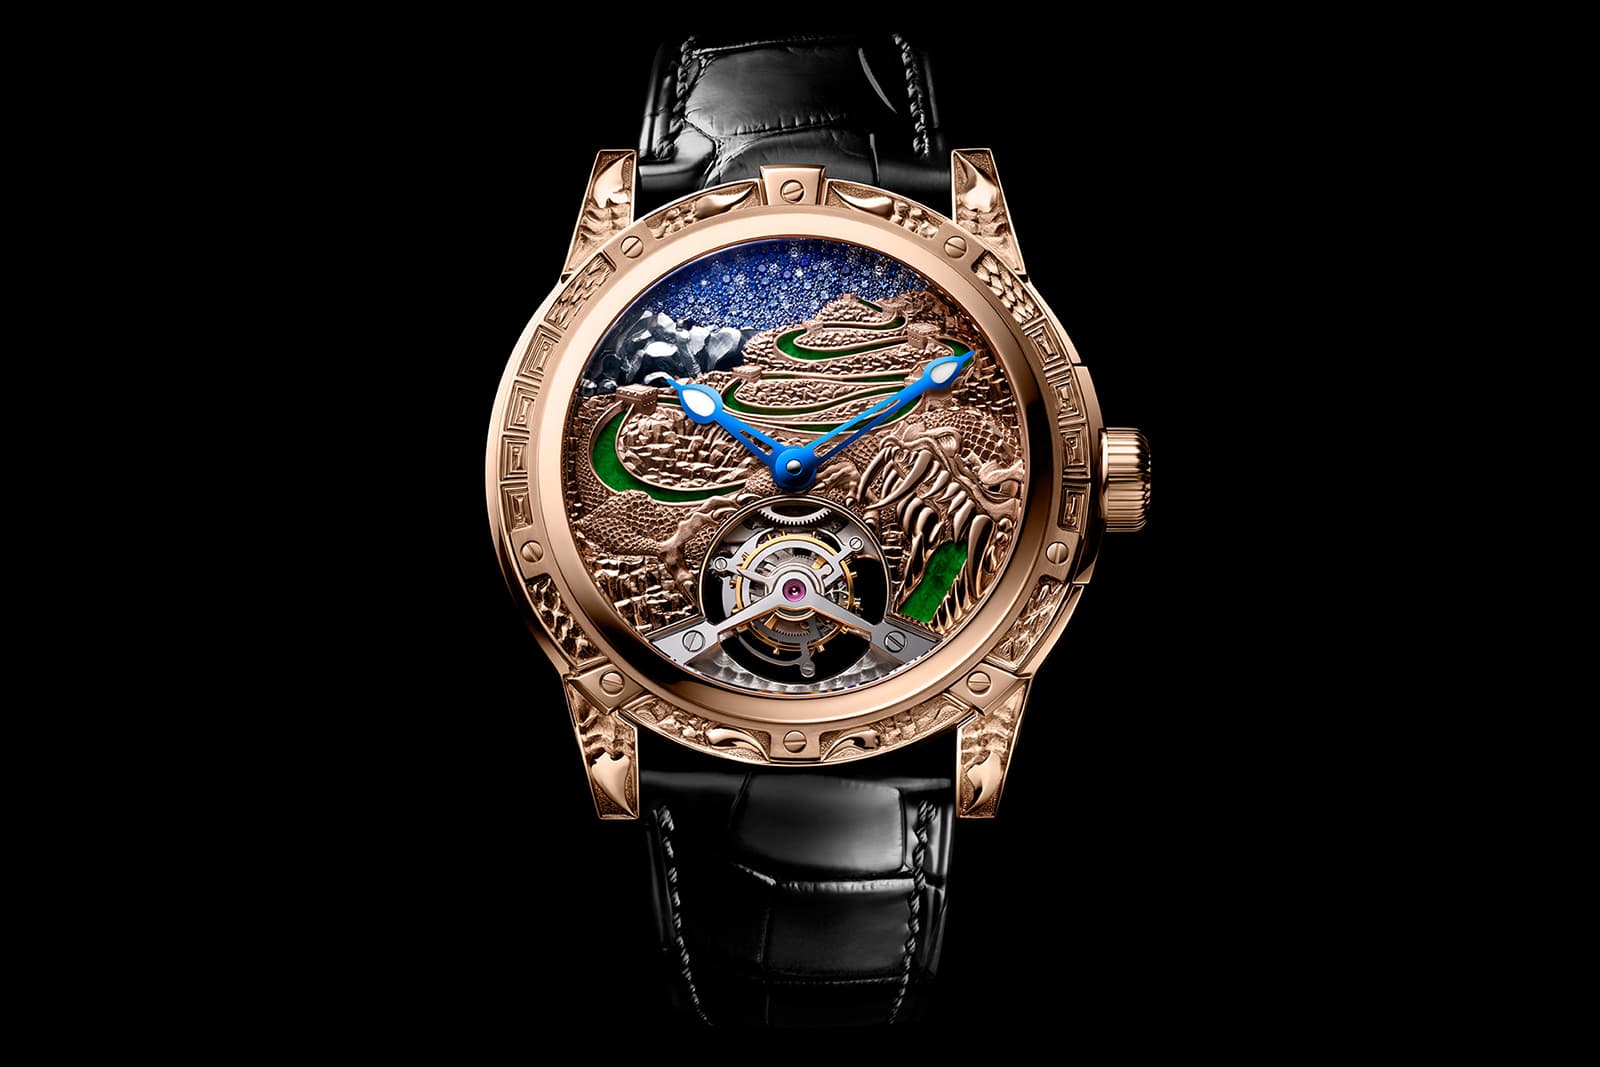 Louis Moinet 8 Marvels of the World watch inspired by the Great Wall of China, featuring a hand-engraved dragon, sapphires, diamonds and 18k white and rose gold